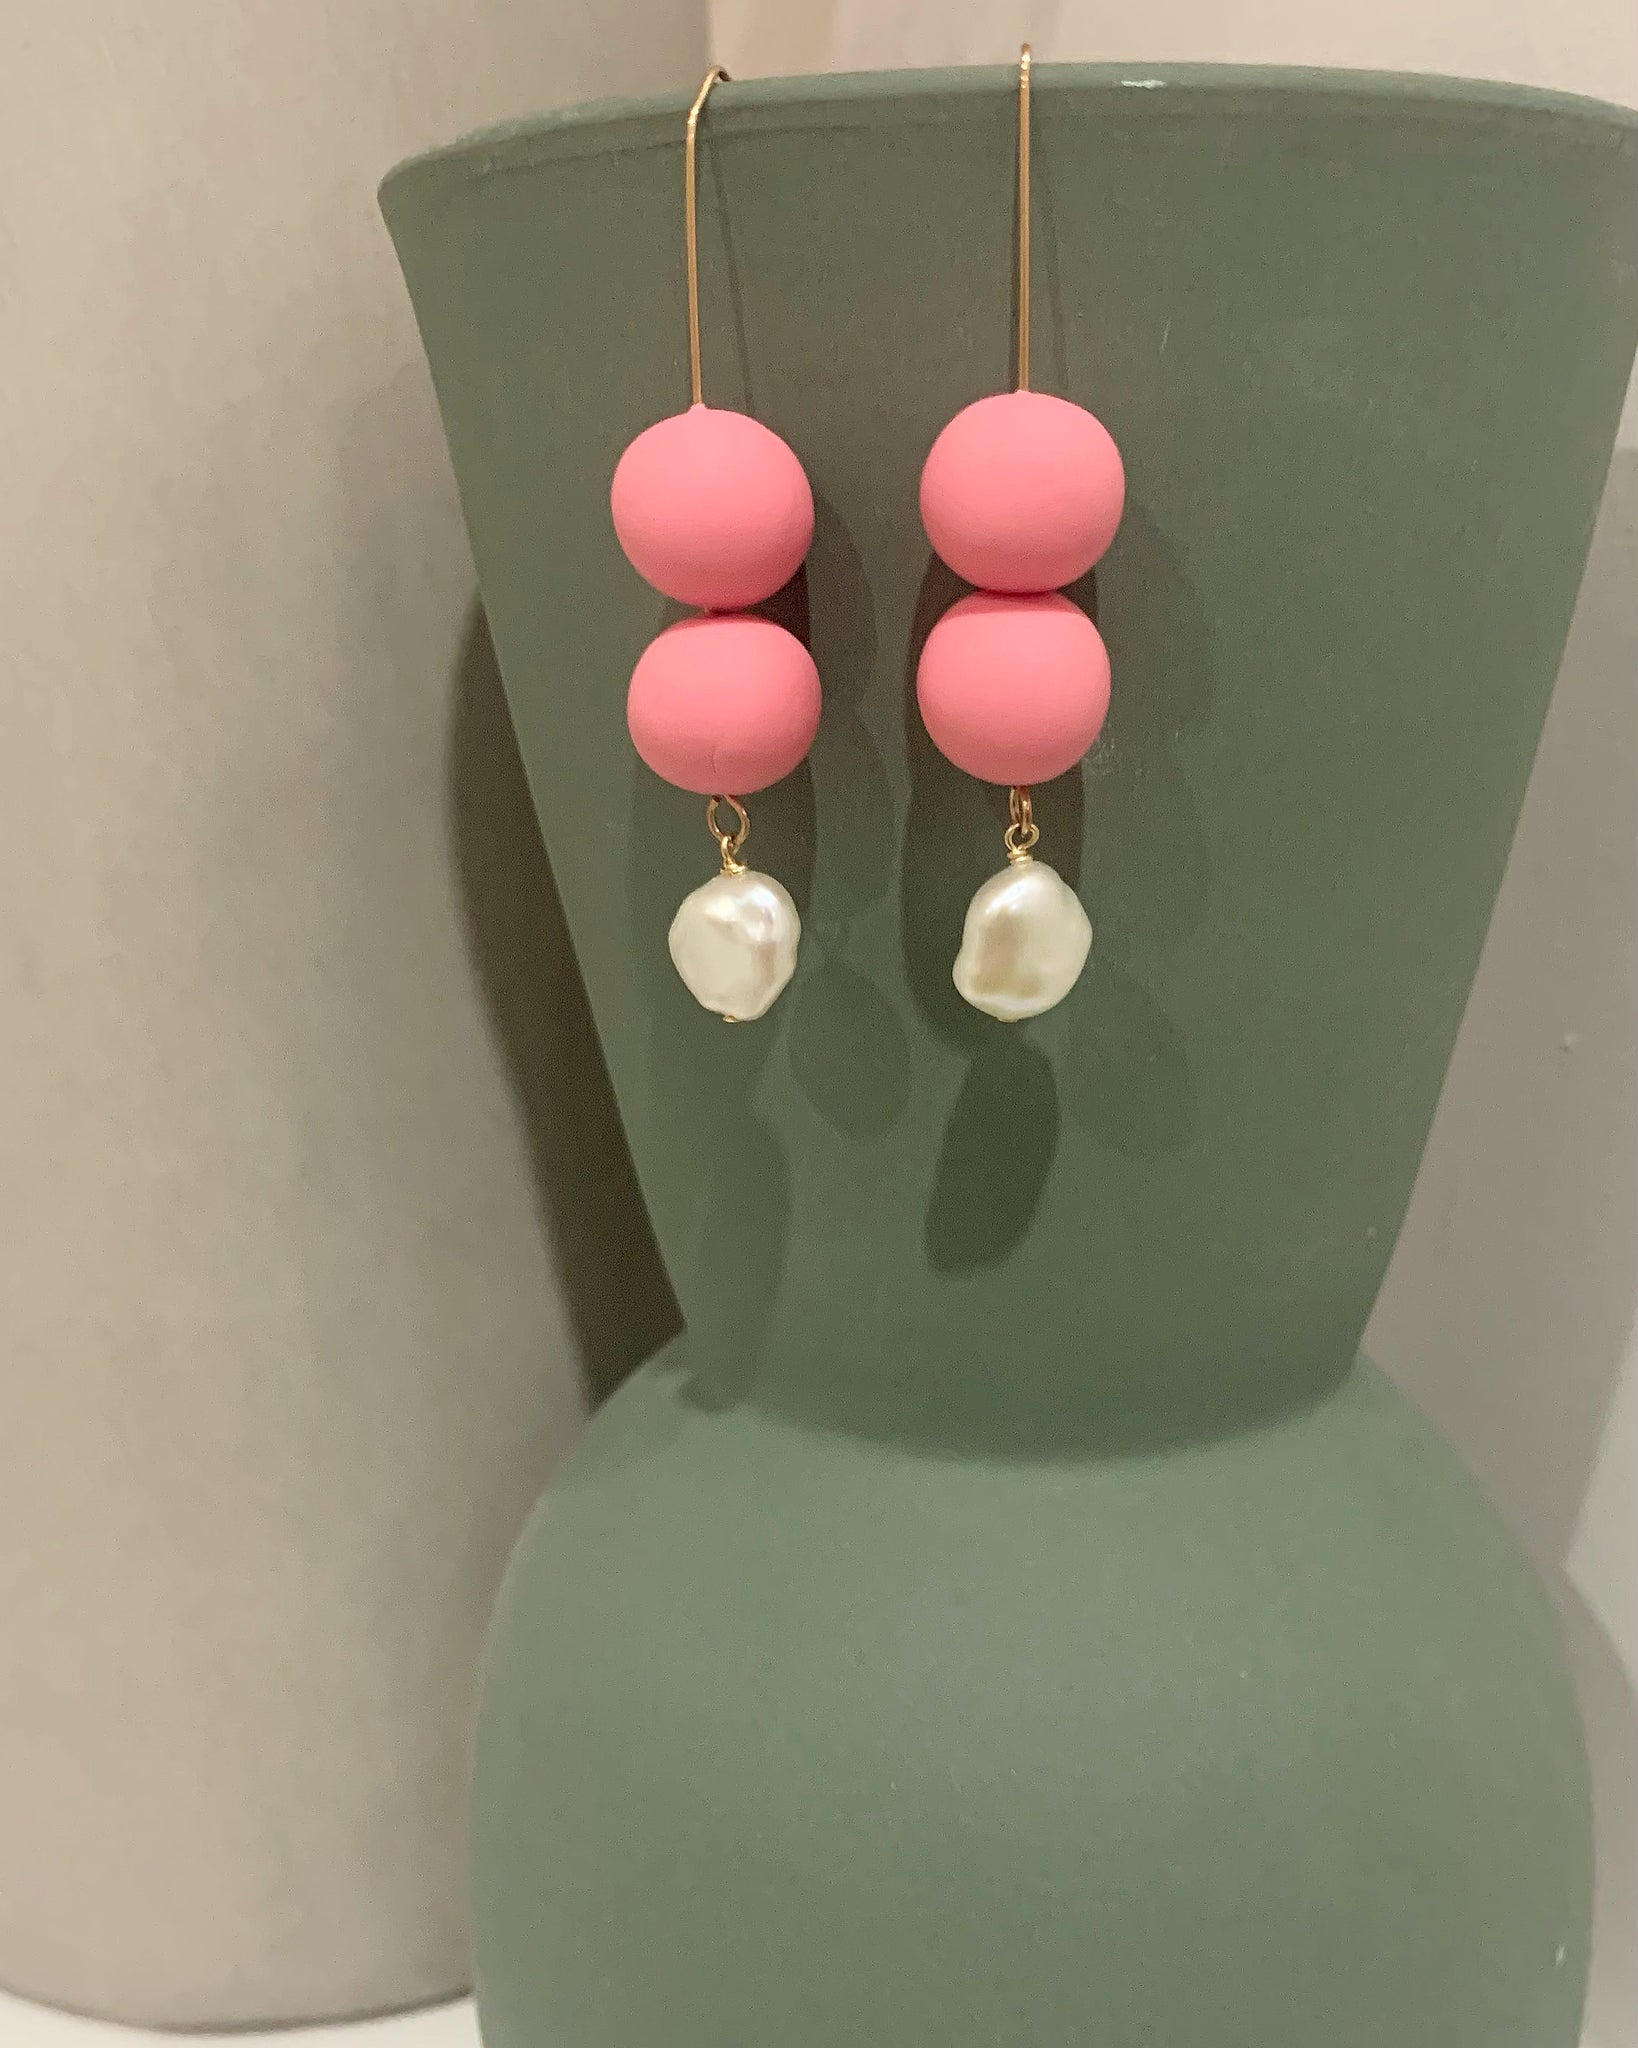 Blush balls on wire with pearl drop